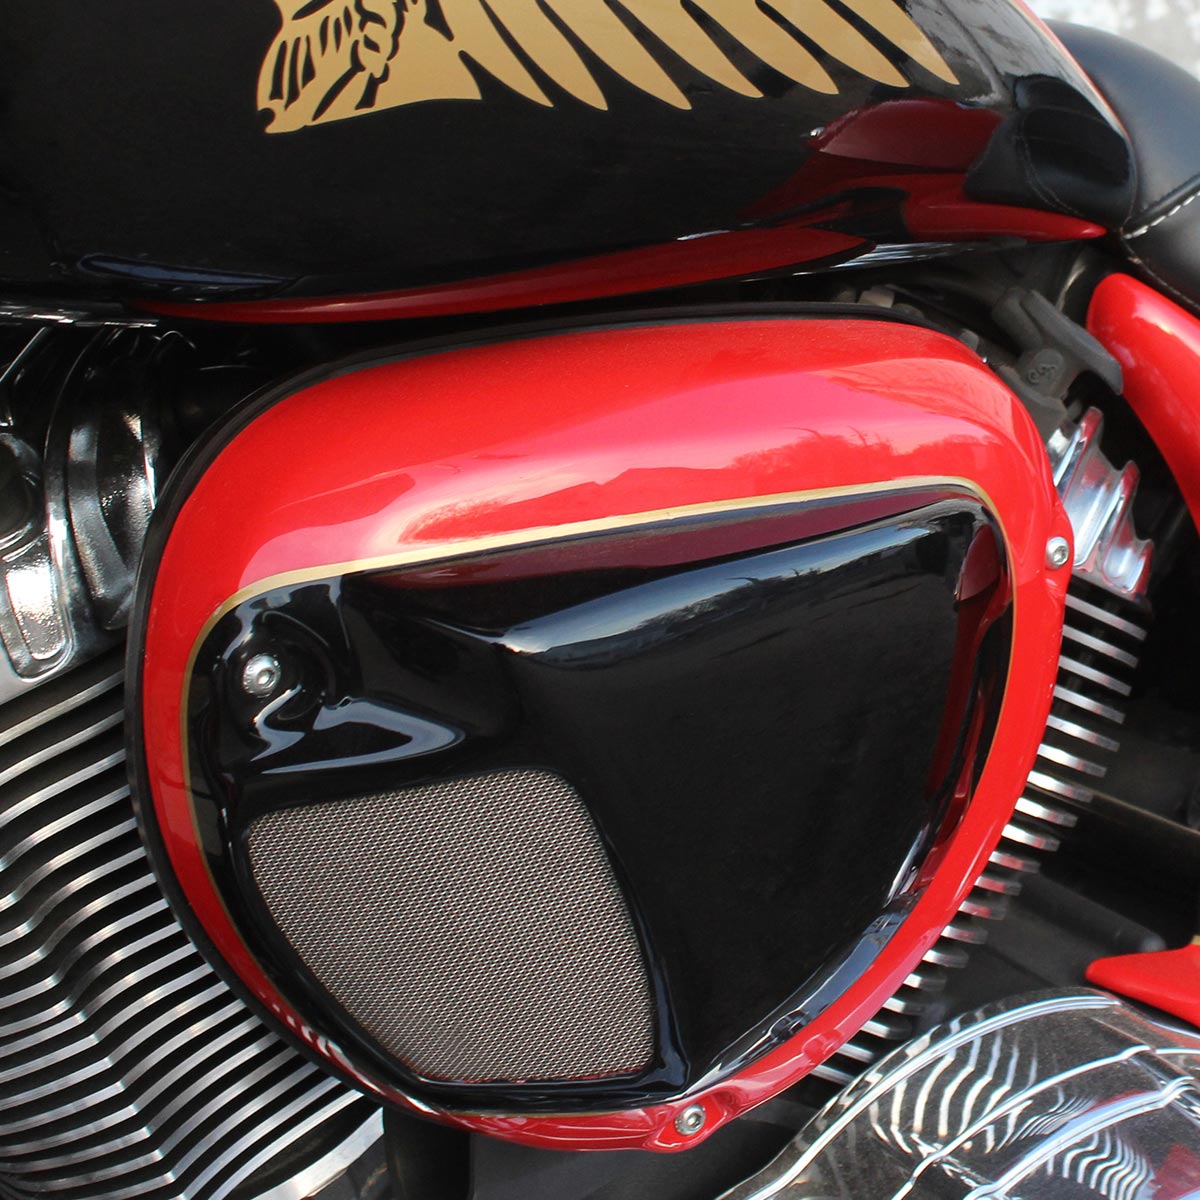 Reytelo Air Cleaner Cover for Indian® Motorcycles shown on 2017 Chieftain(Shown on 2017 Chieftain)